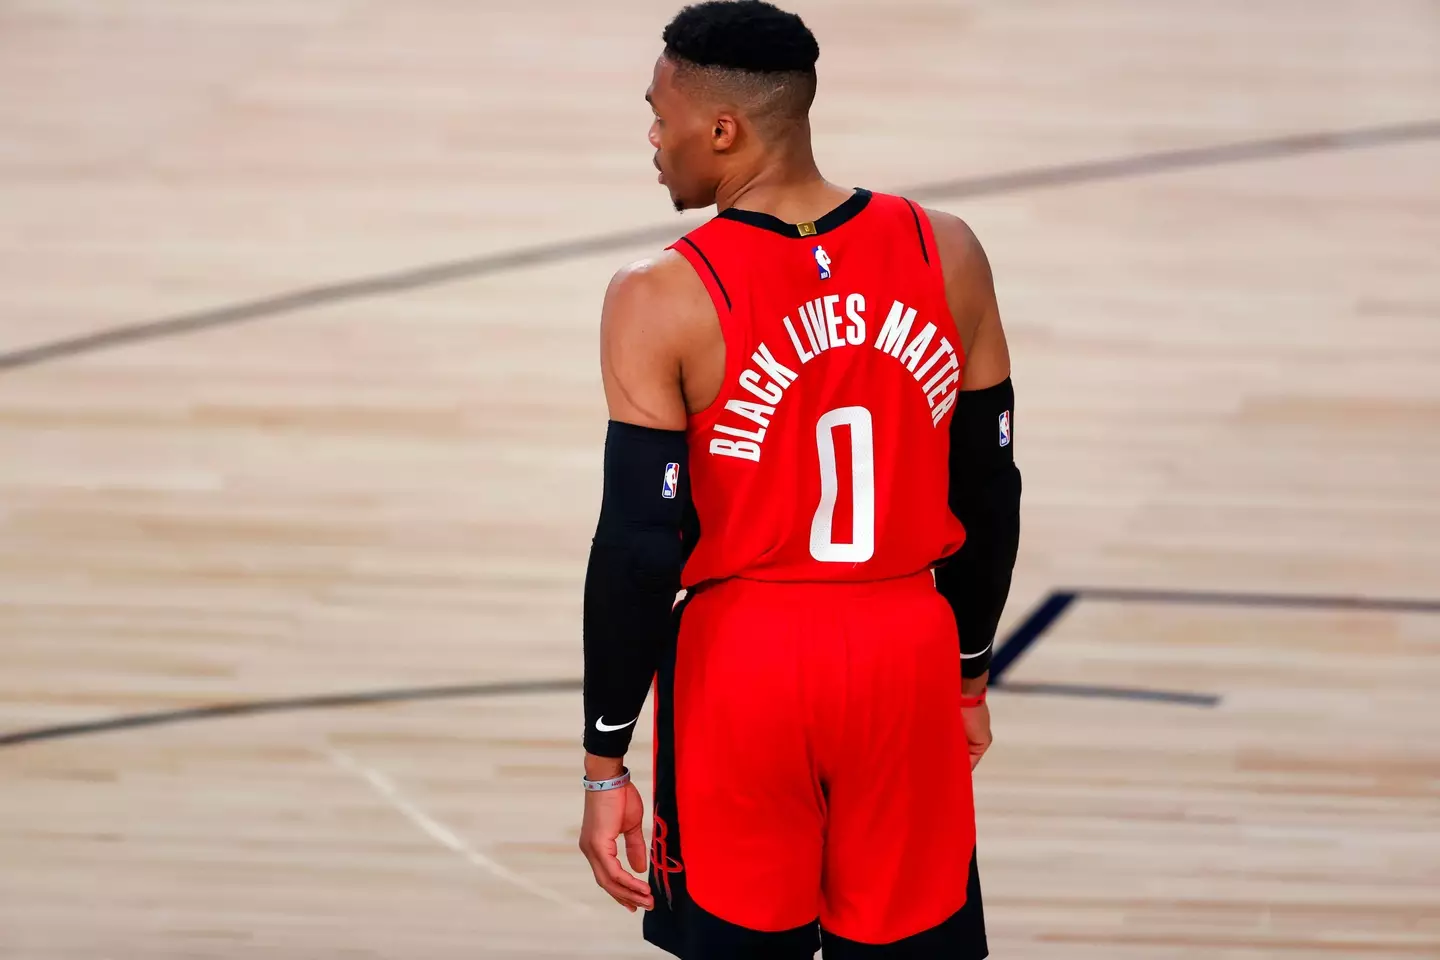 Players like Russell Westbrook (pictured) were allowed to wear slogans on their jerseys.